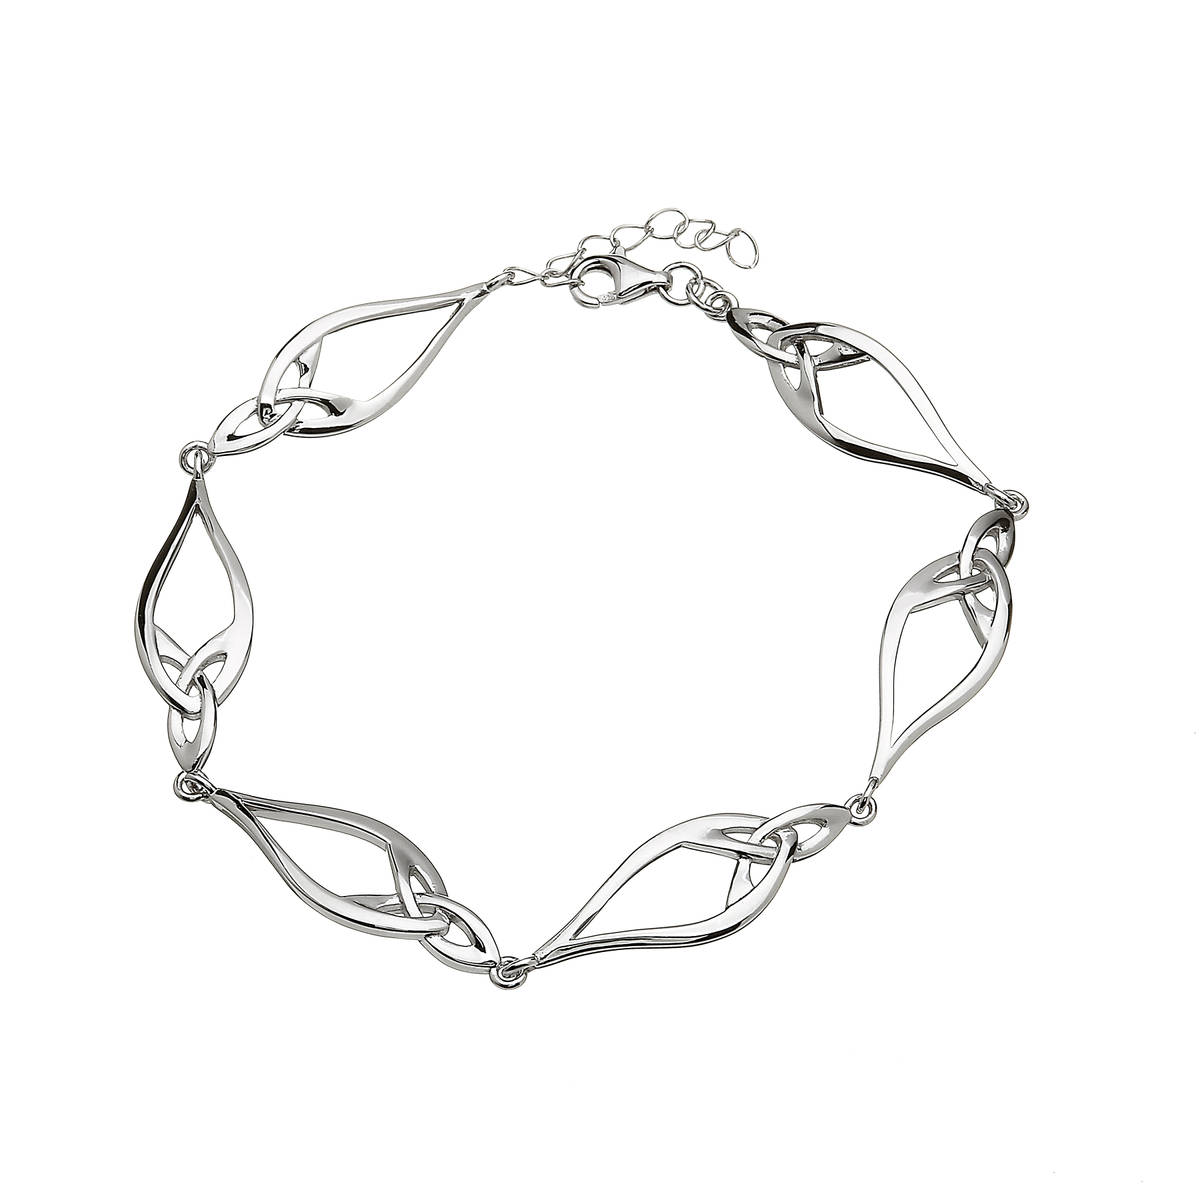 Silver Celtic Bracelet With Six Links And Chain Extender